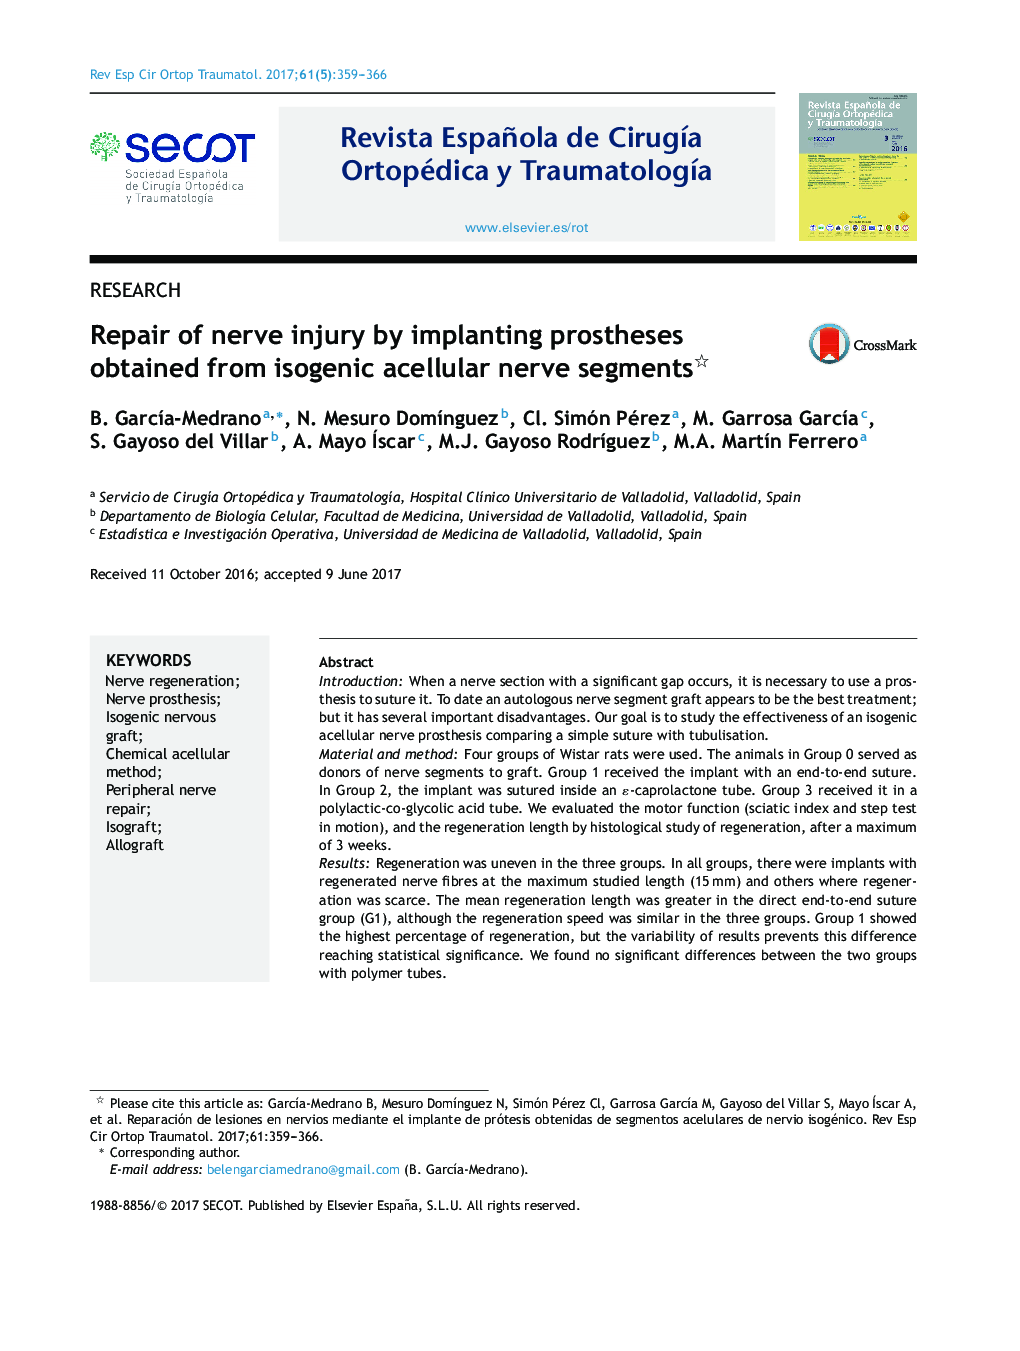 Repair of nerve injury by implanting prostheses obtained from isogenic acellular nerve segments